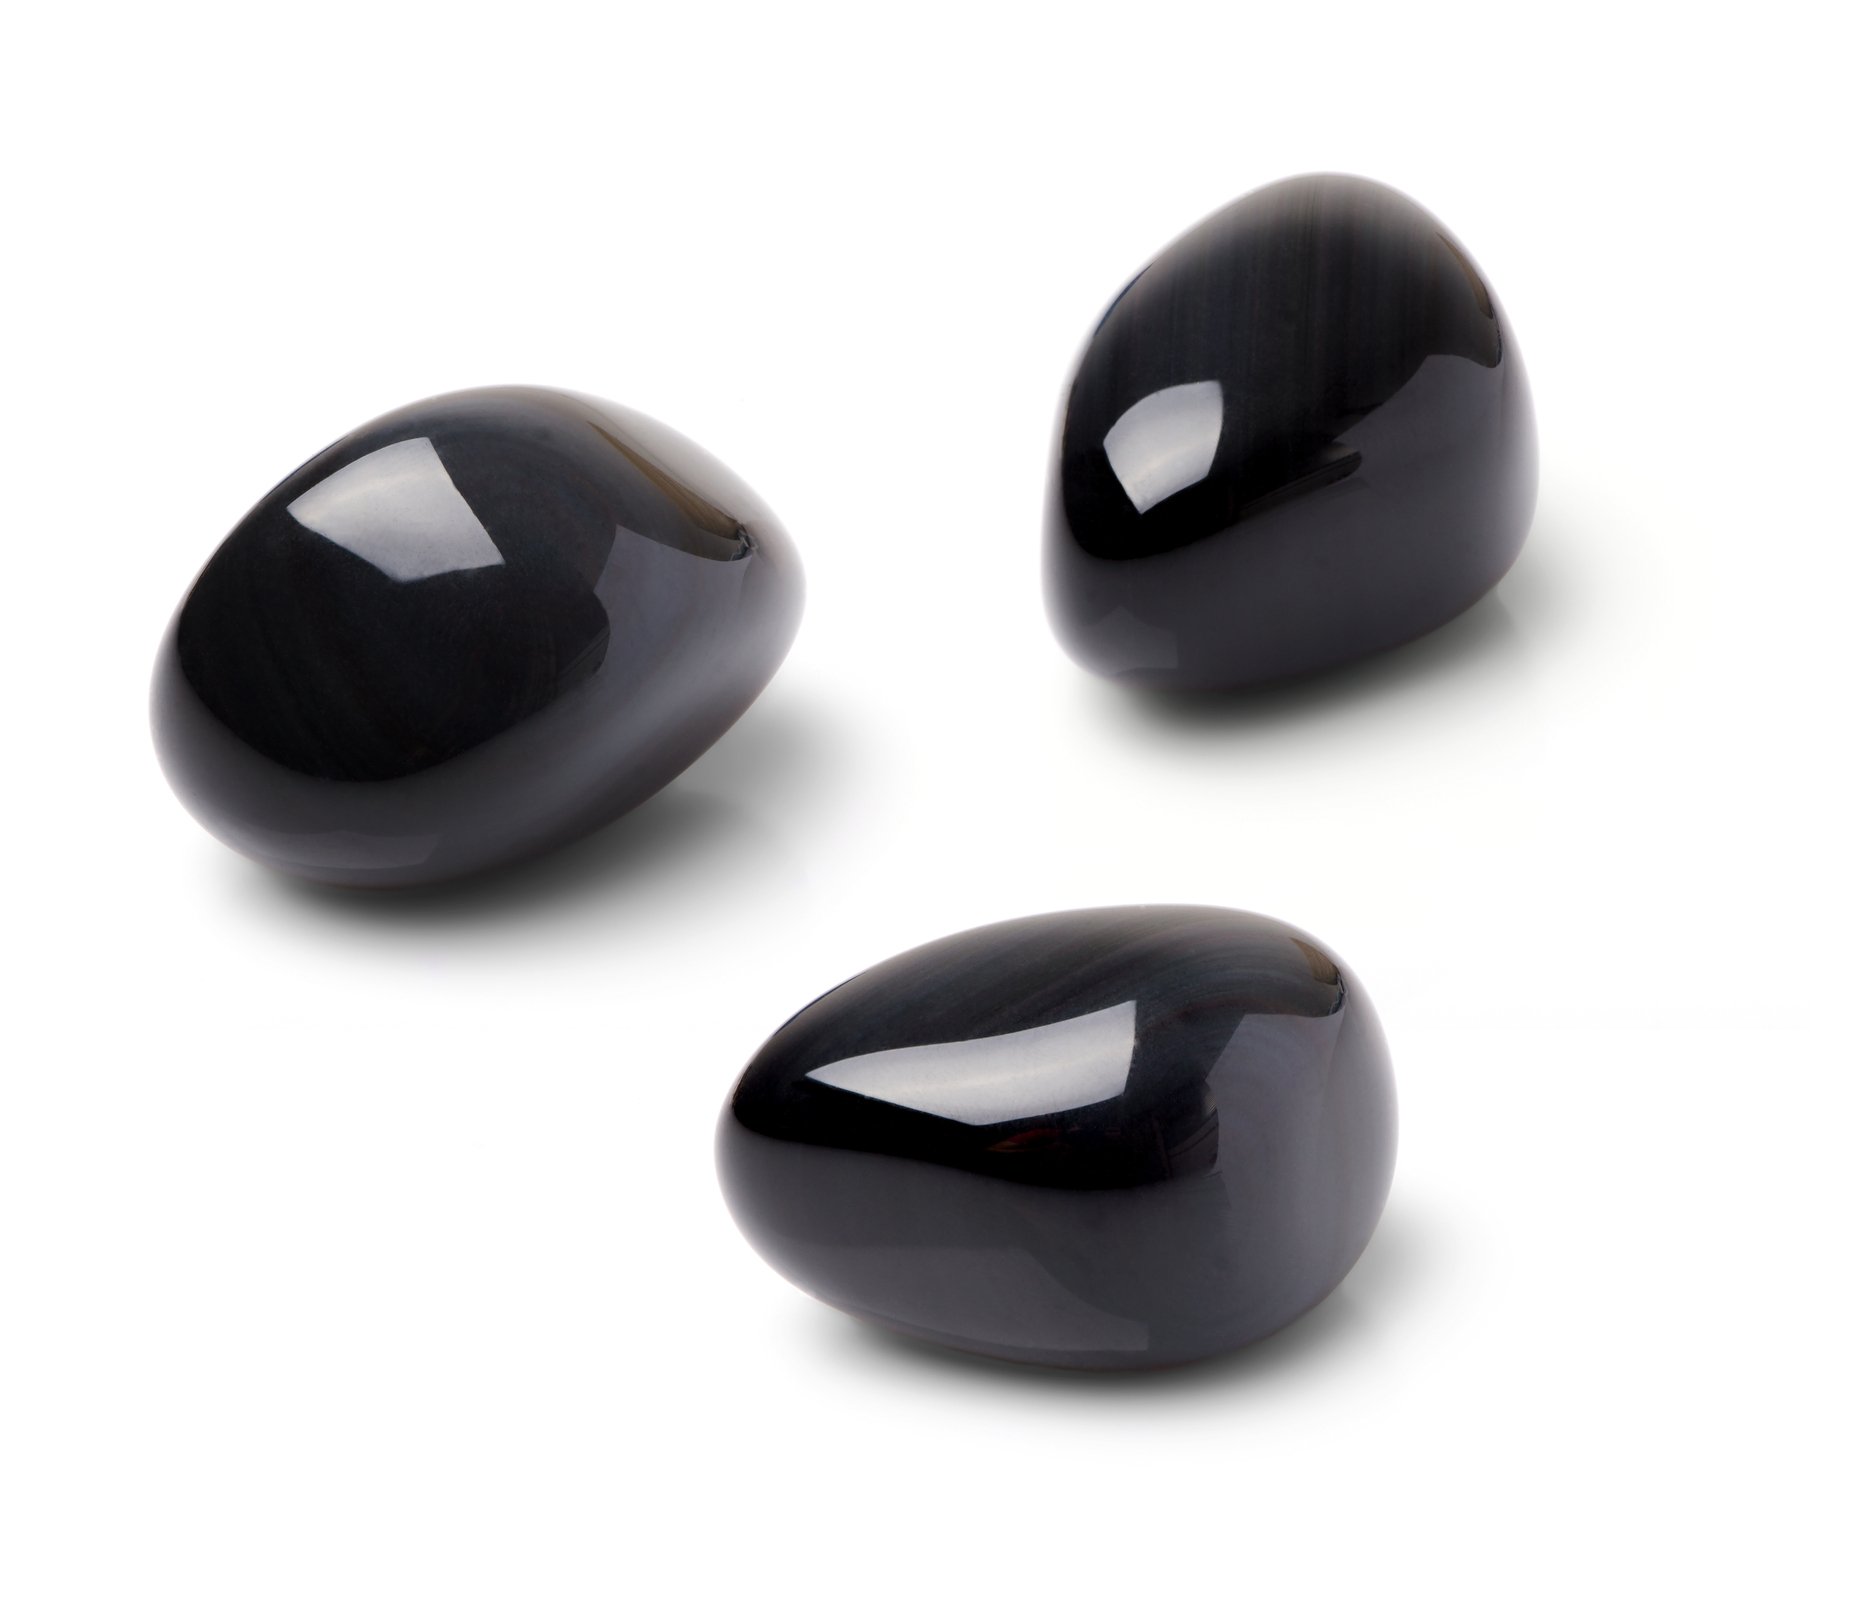 Obsidian is a glass-like rock that forms from volcanic lava cooling rapidly. (iStock Photo)